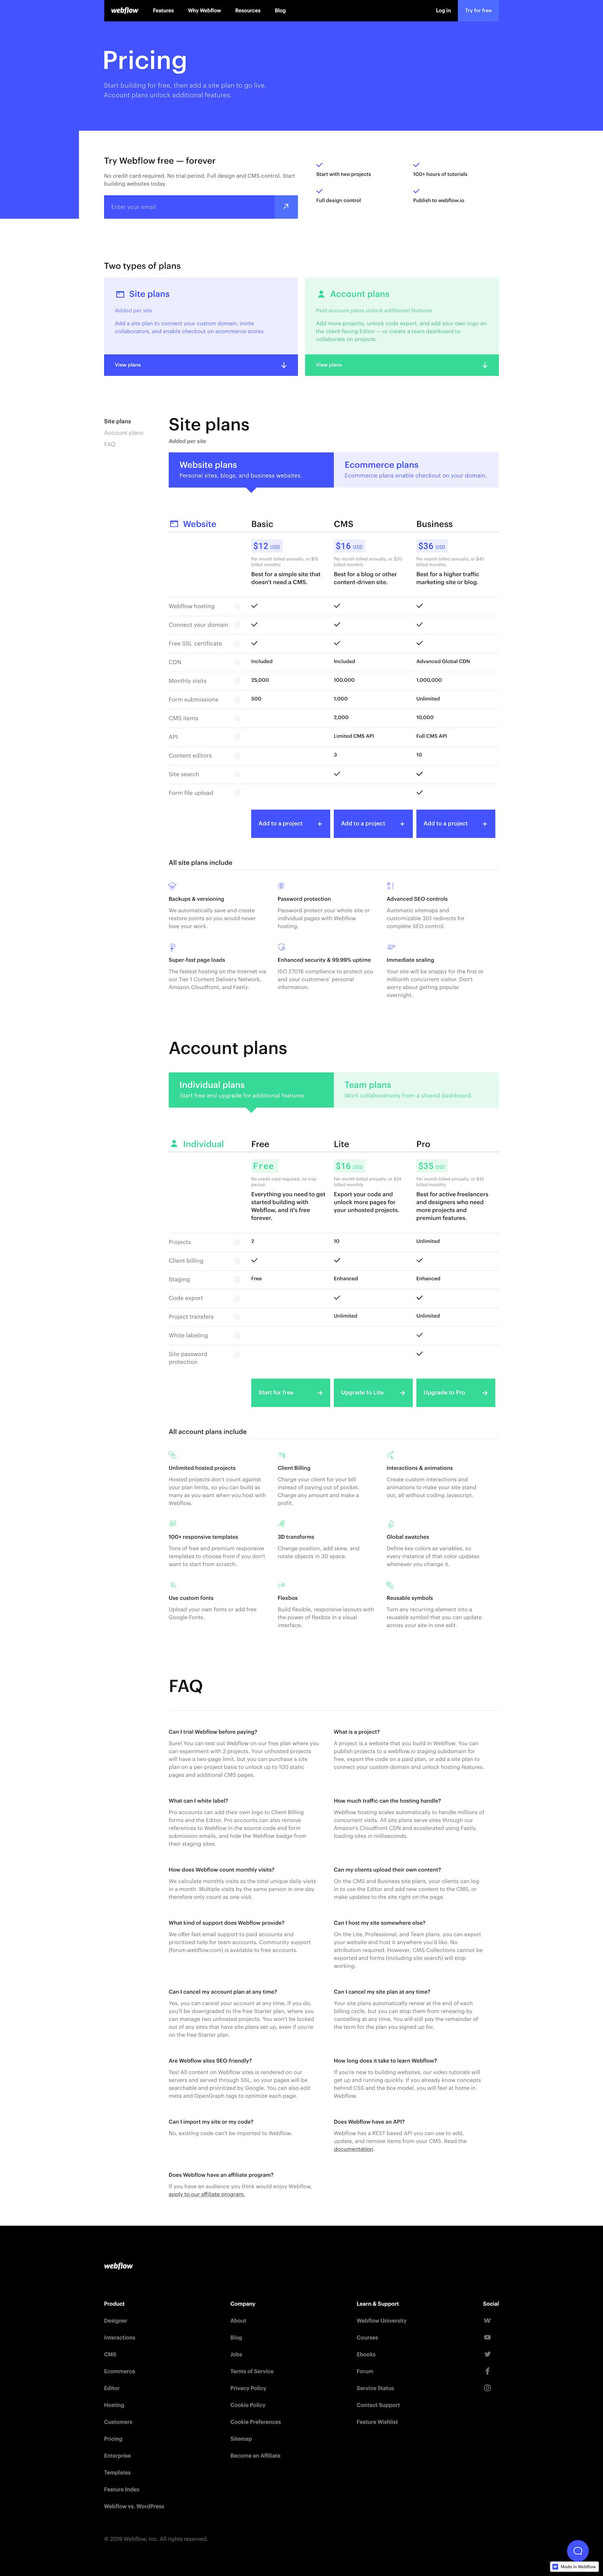 Screenshot of the Pricing page from the Webflow website.